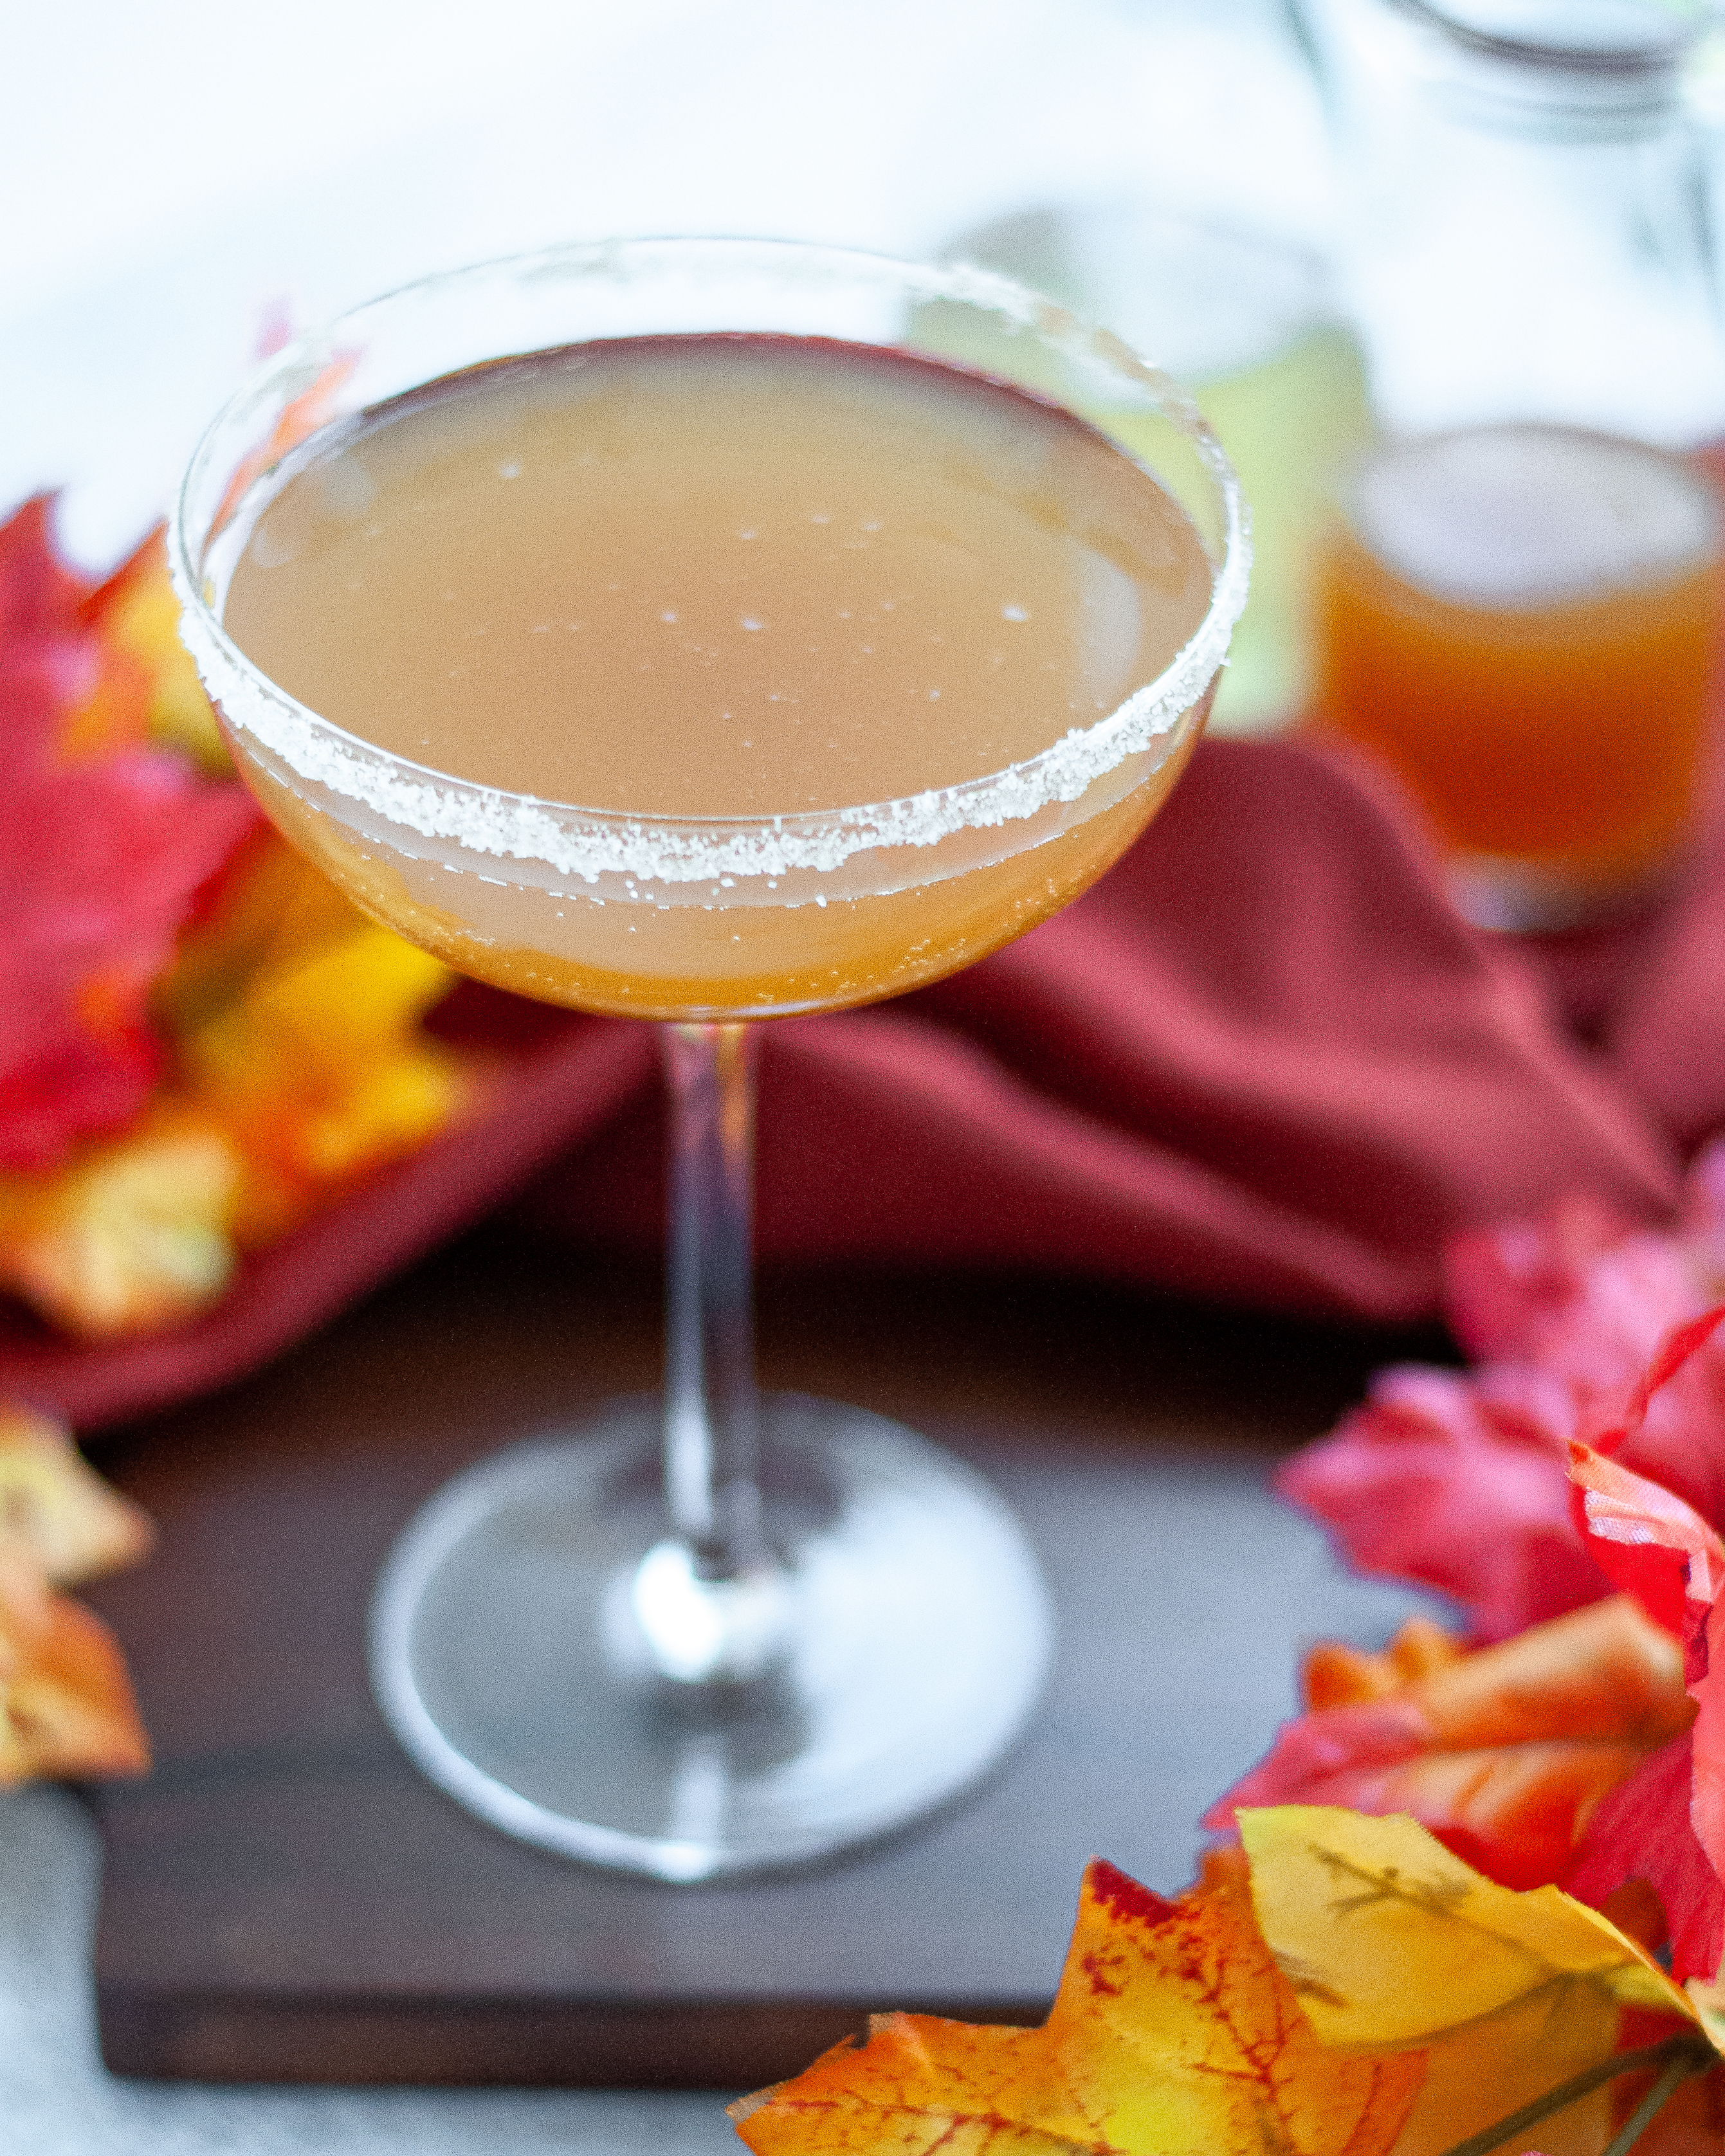 close up of a coupe glass filled with an apple cider mocktail with a sugar rim. The glass is surrounded by fall leaves, an orange linen, and glass jars with ginger beer and apple cider.